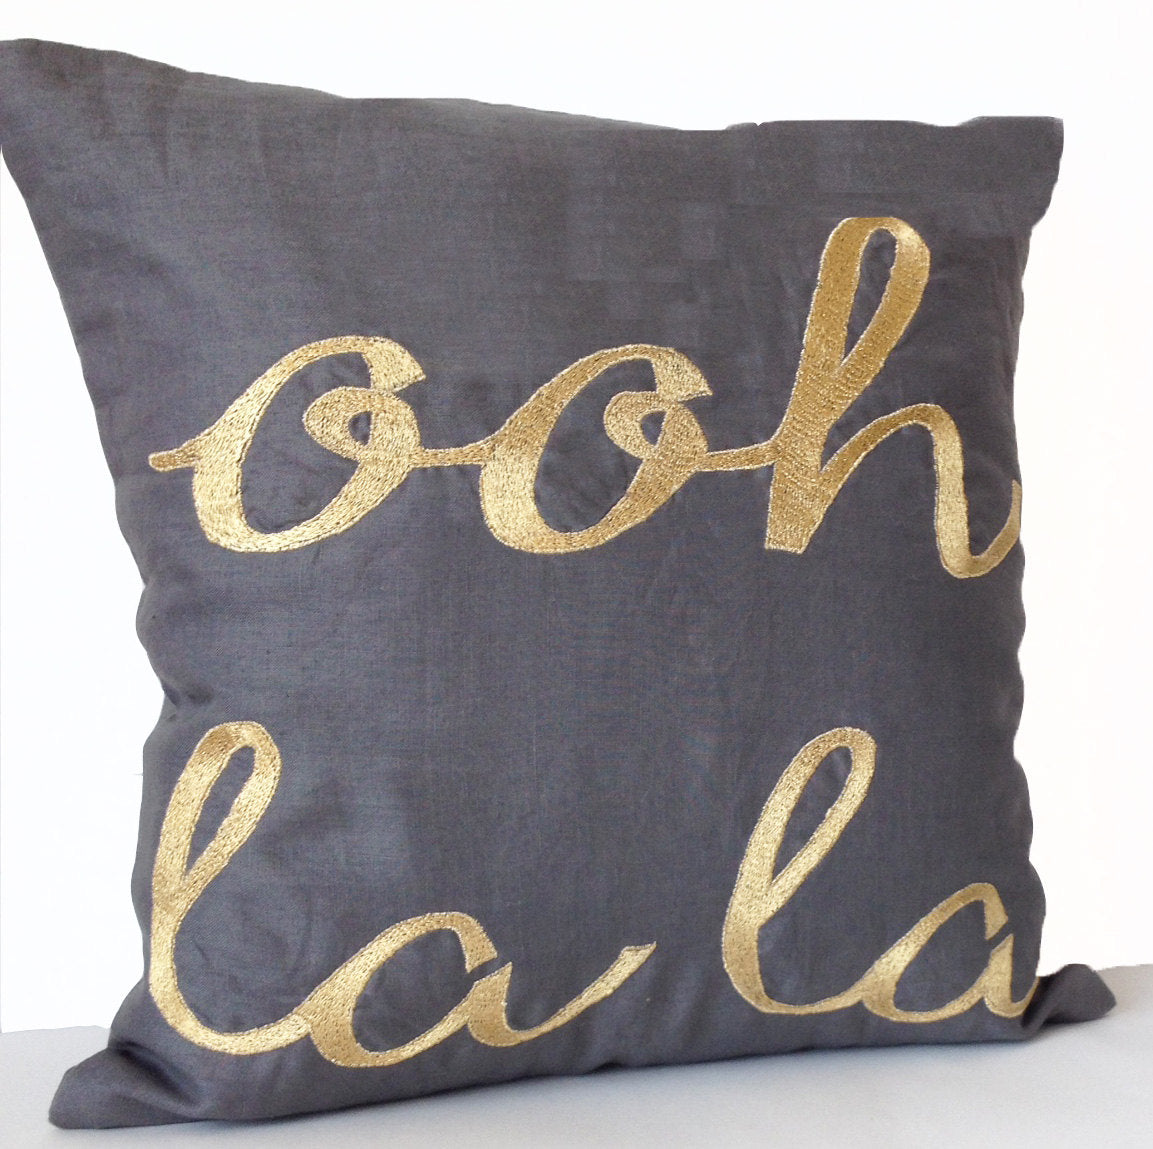 Amore Beaute Gray Linen Throw Pillow Cover with Gold Ooh La La Embroidery Success